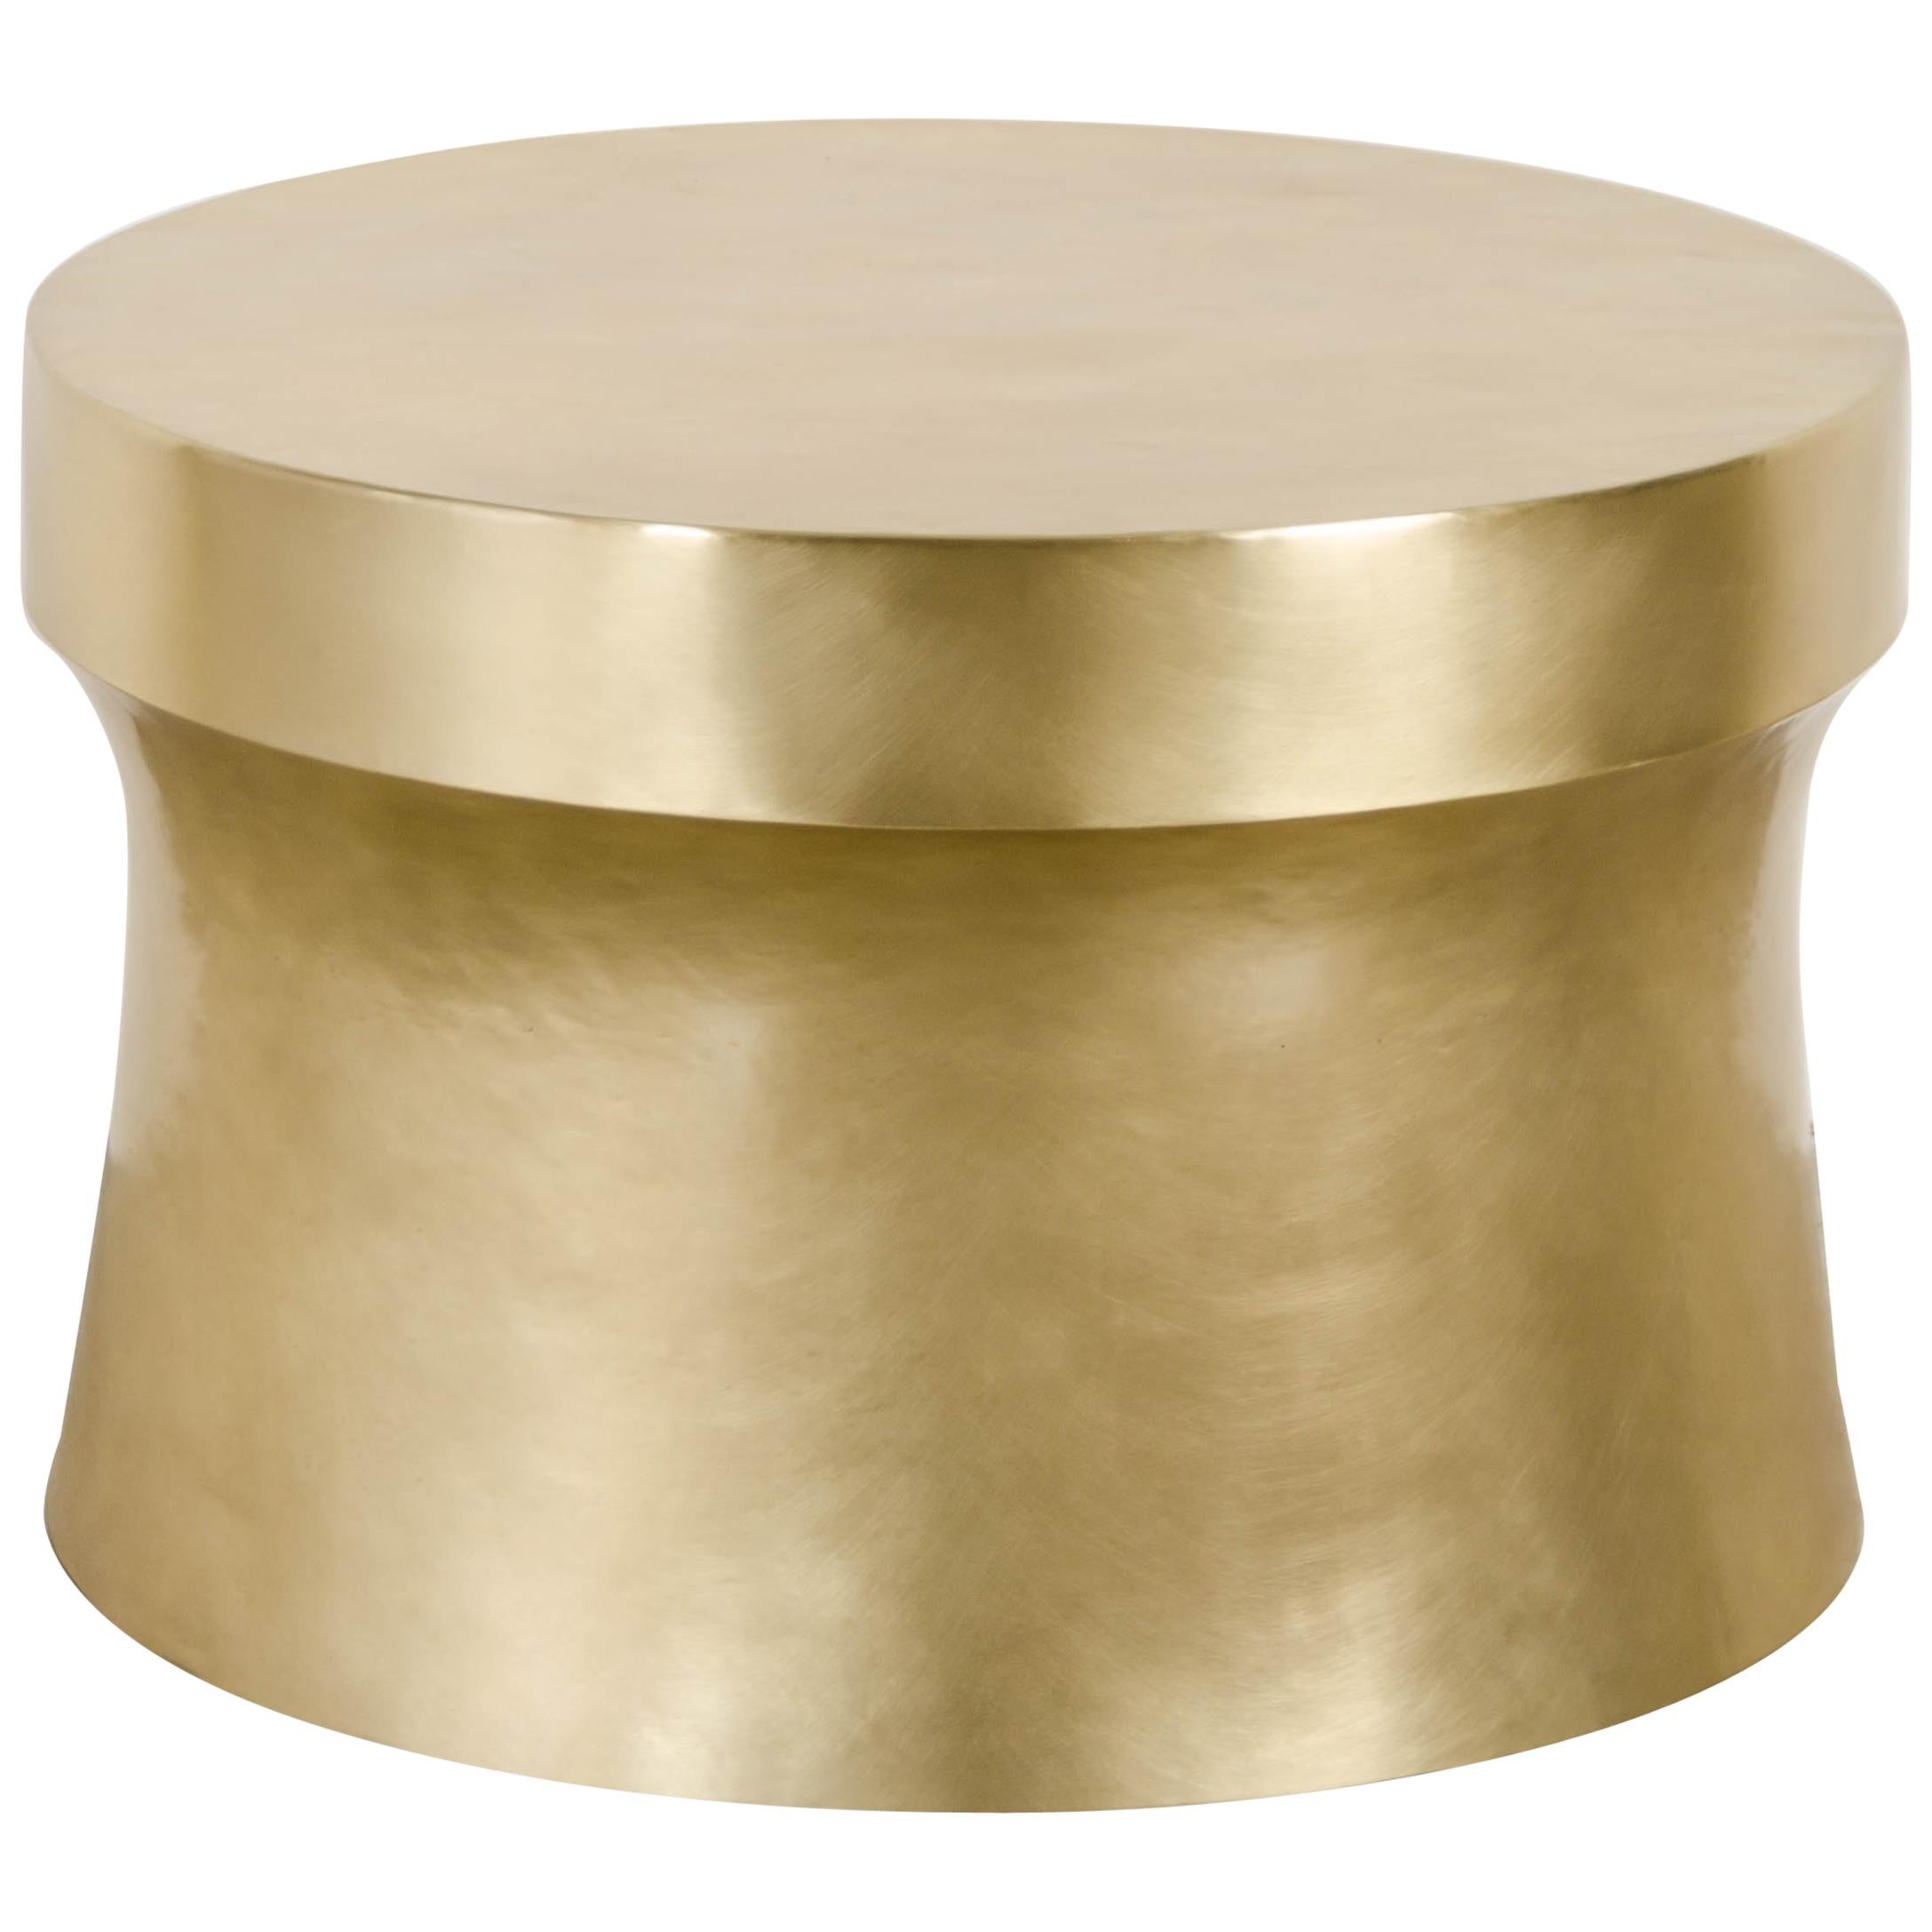 Dong Shan Table, Brass by Robert Kuo, Hand Repousse, Limited Edition